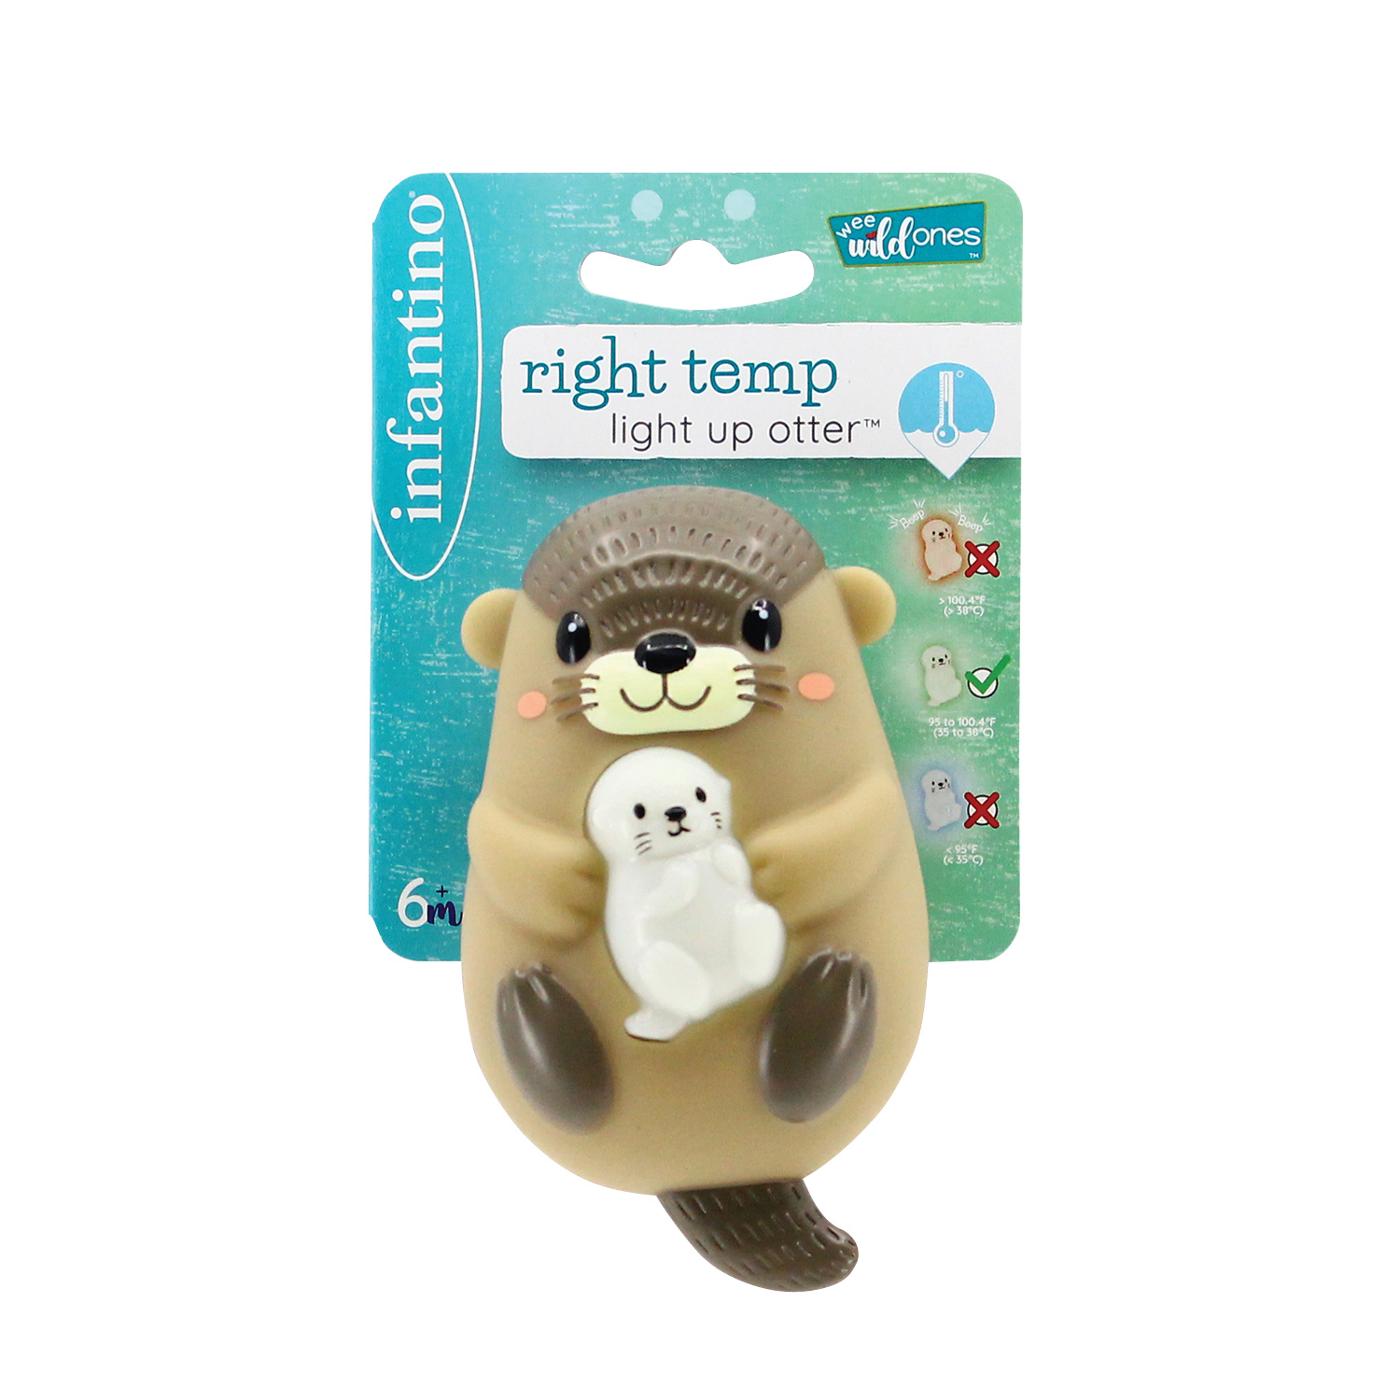 Infantino Right Temp Light Up Otter; image 1 of 2